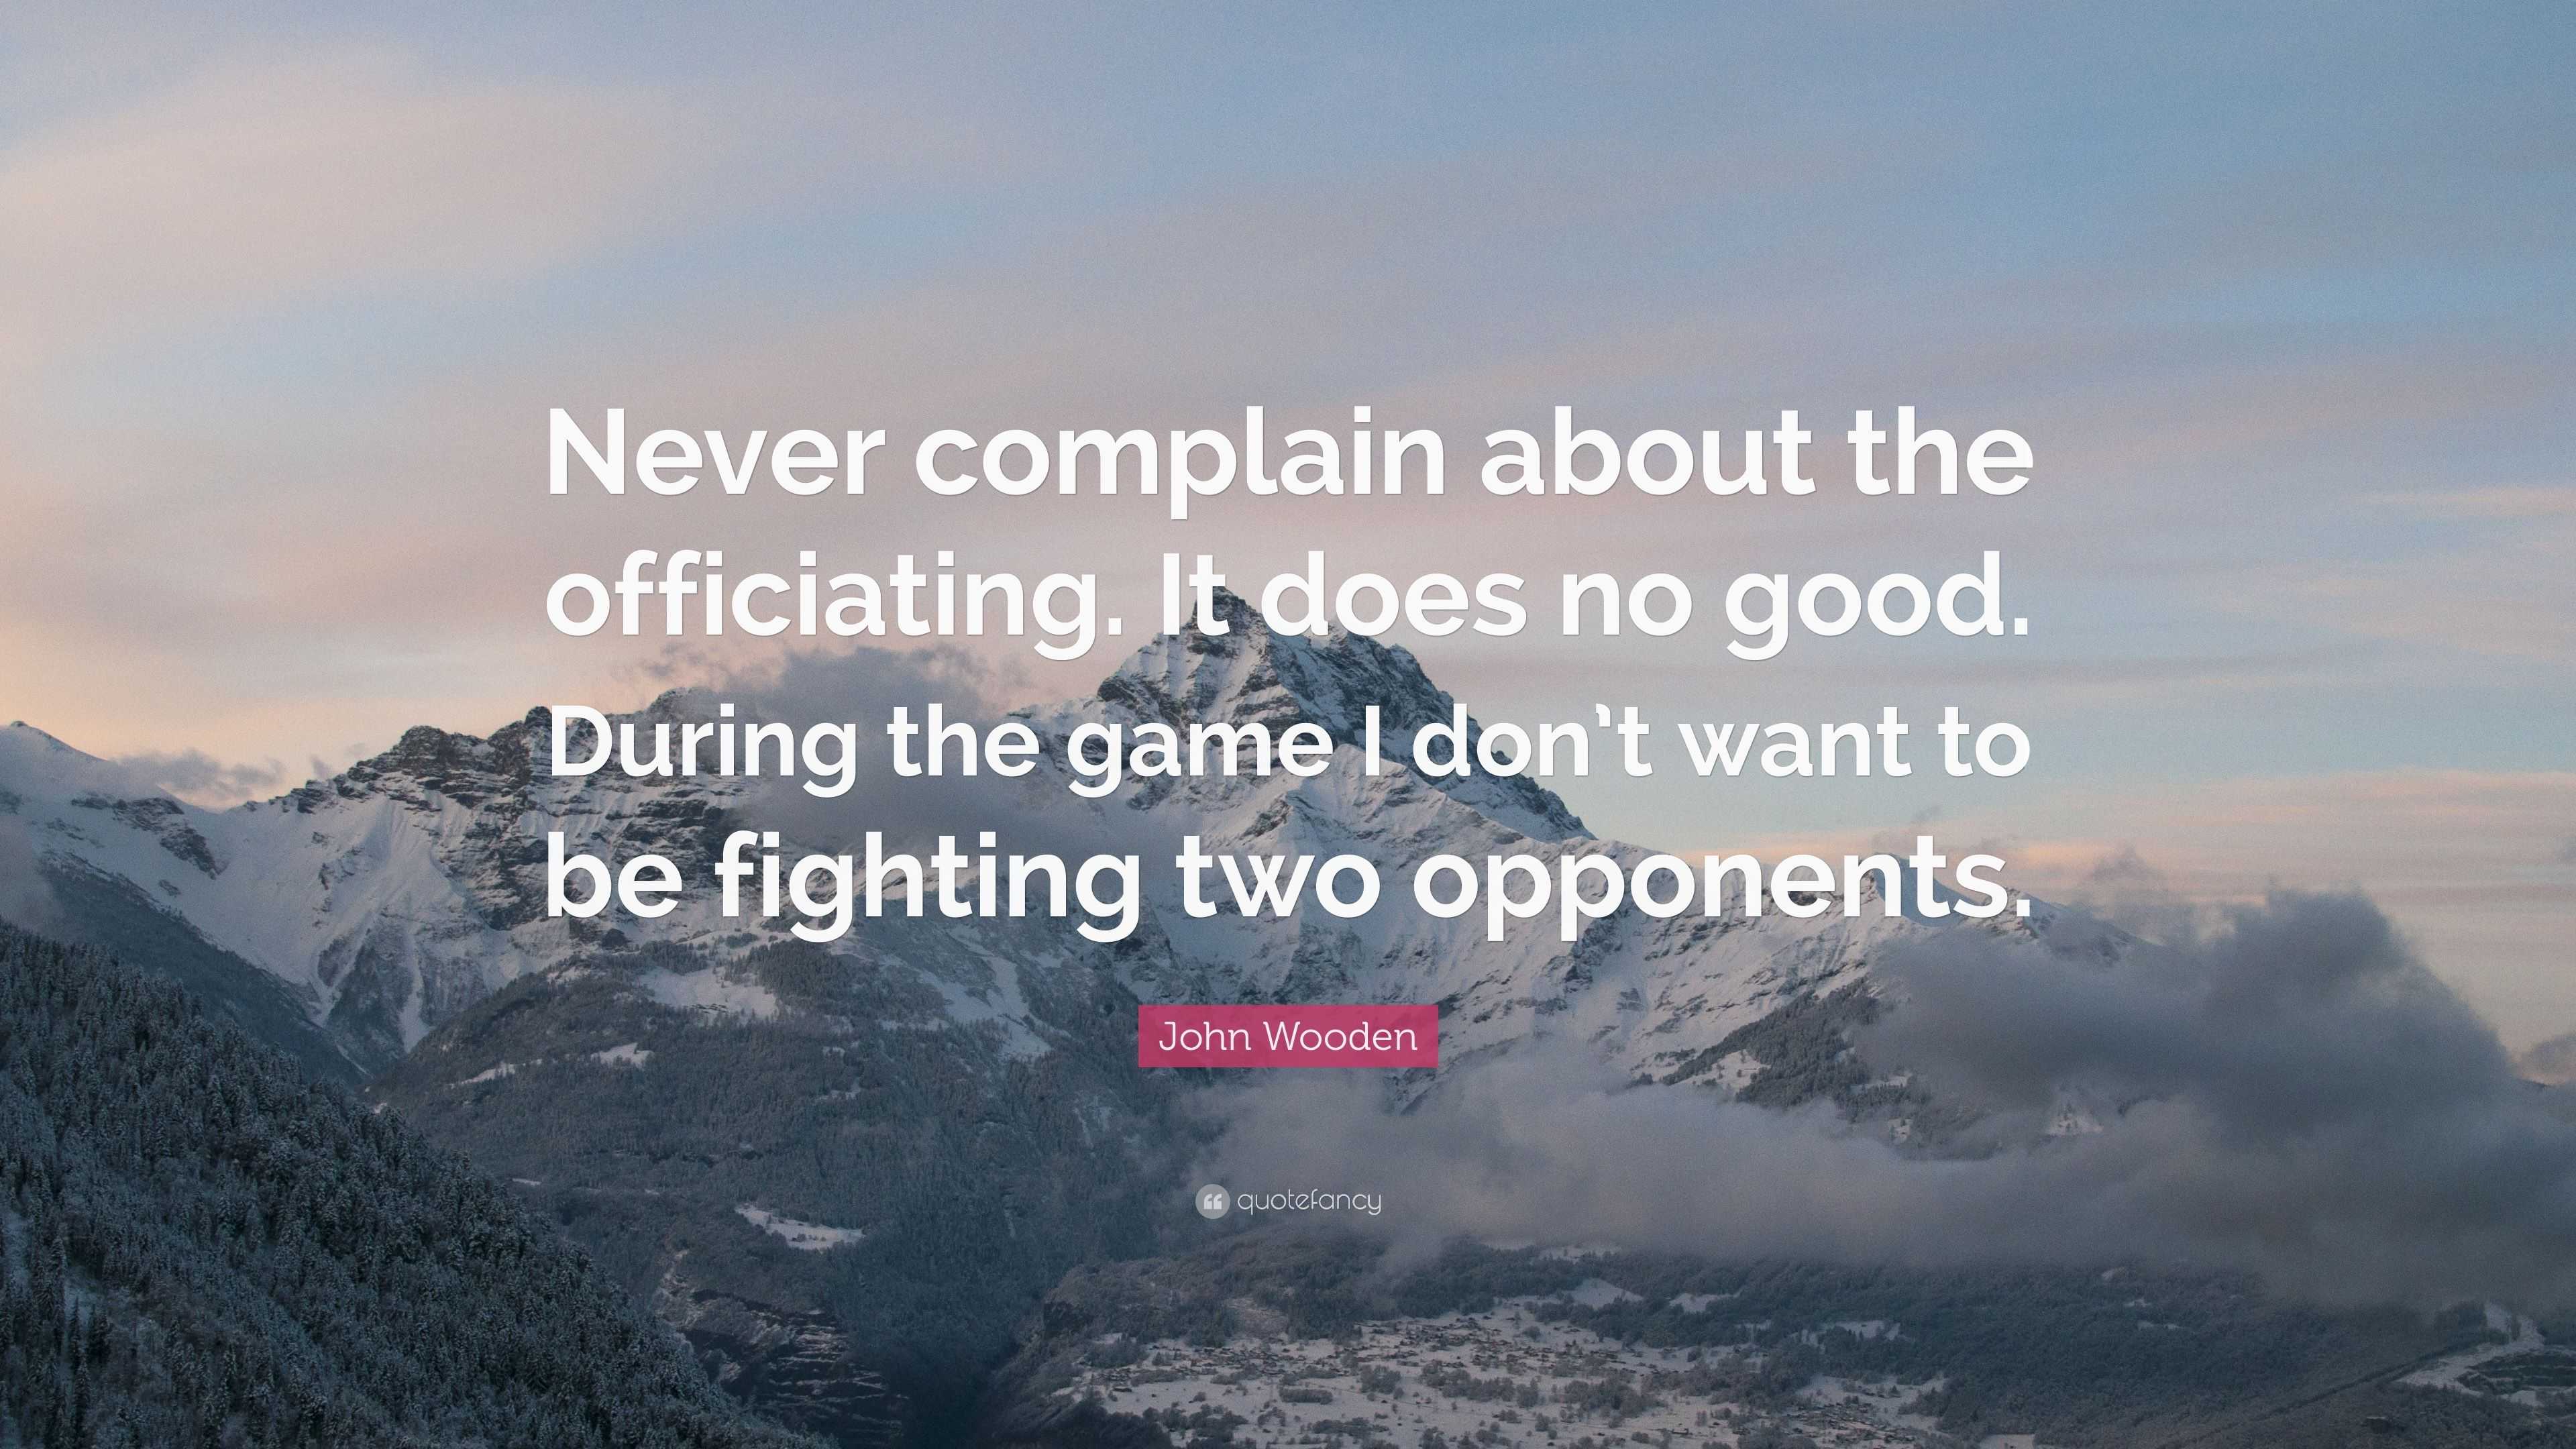 John Wooden Quote: “Never complain about the officiating. It does no ...